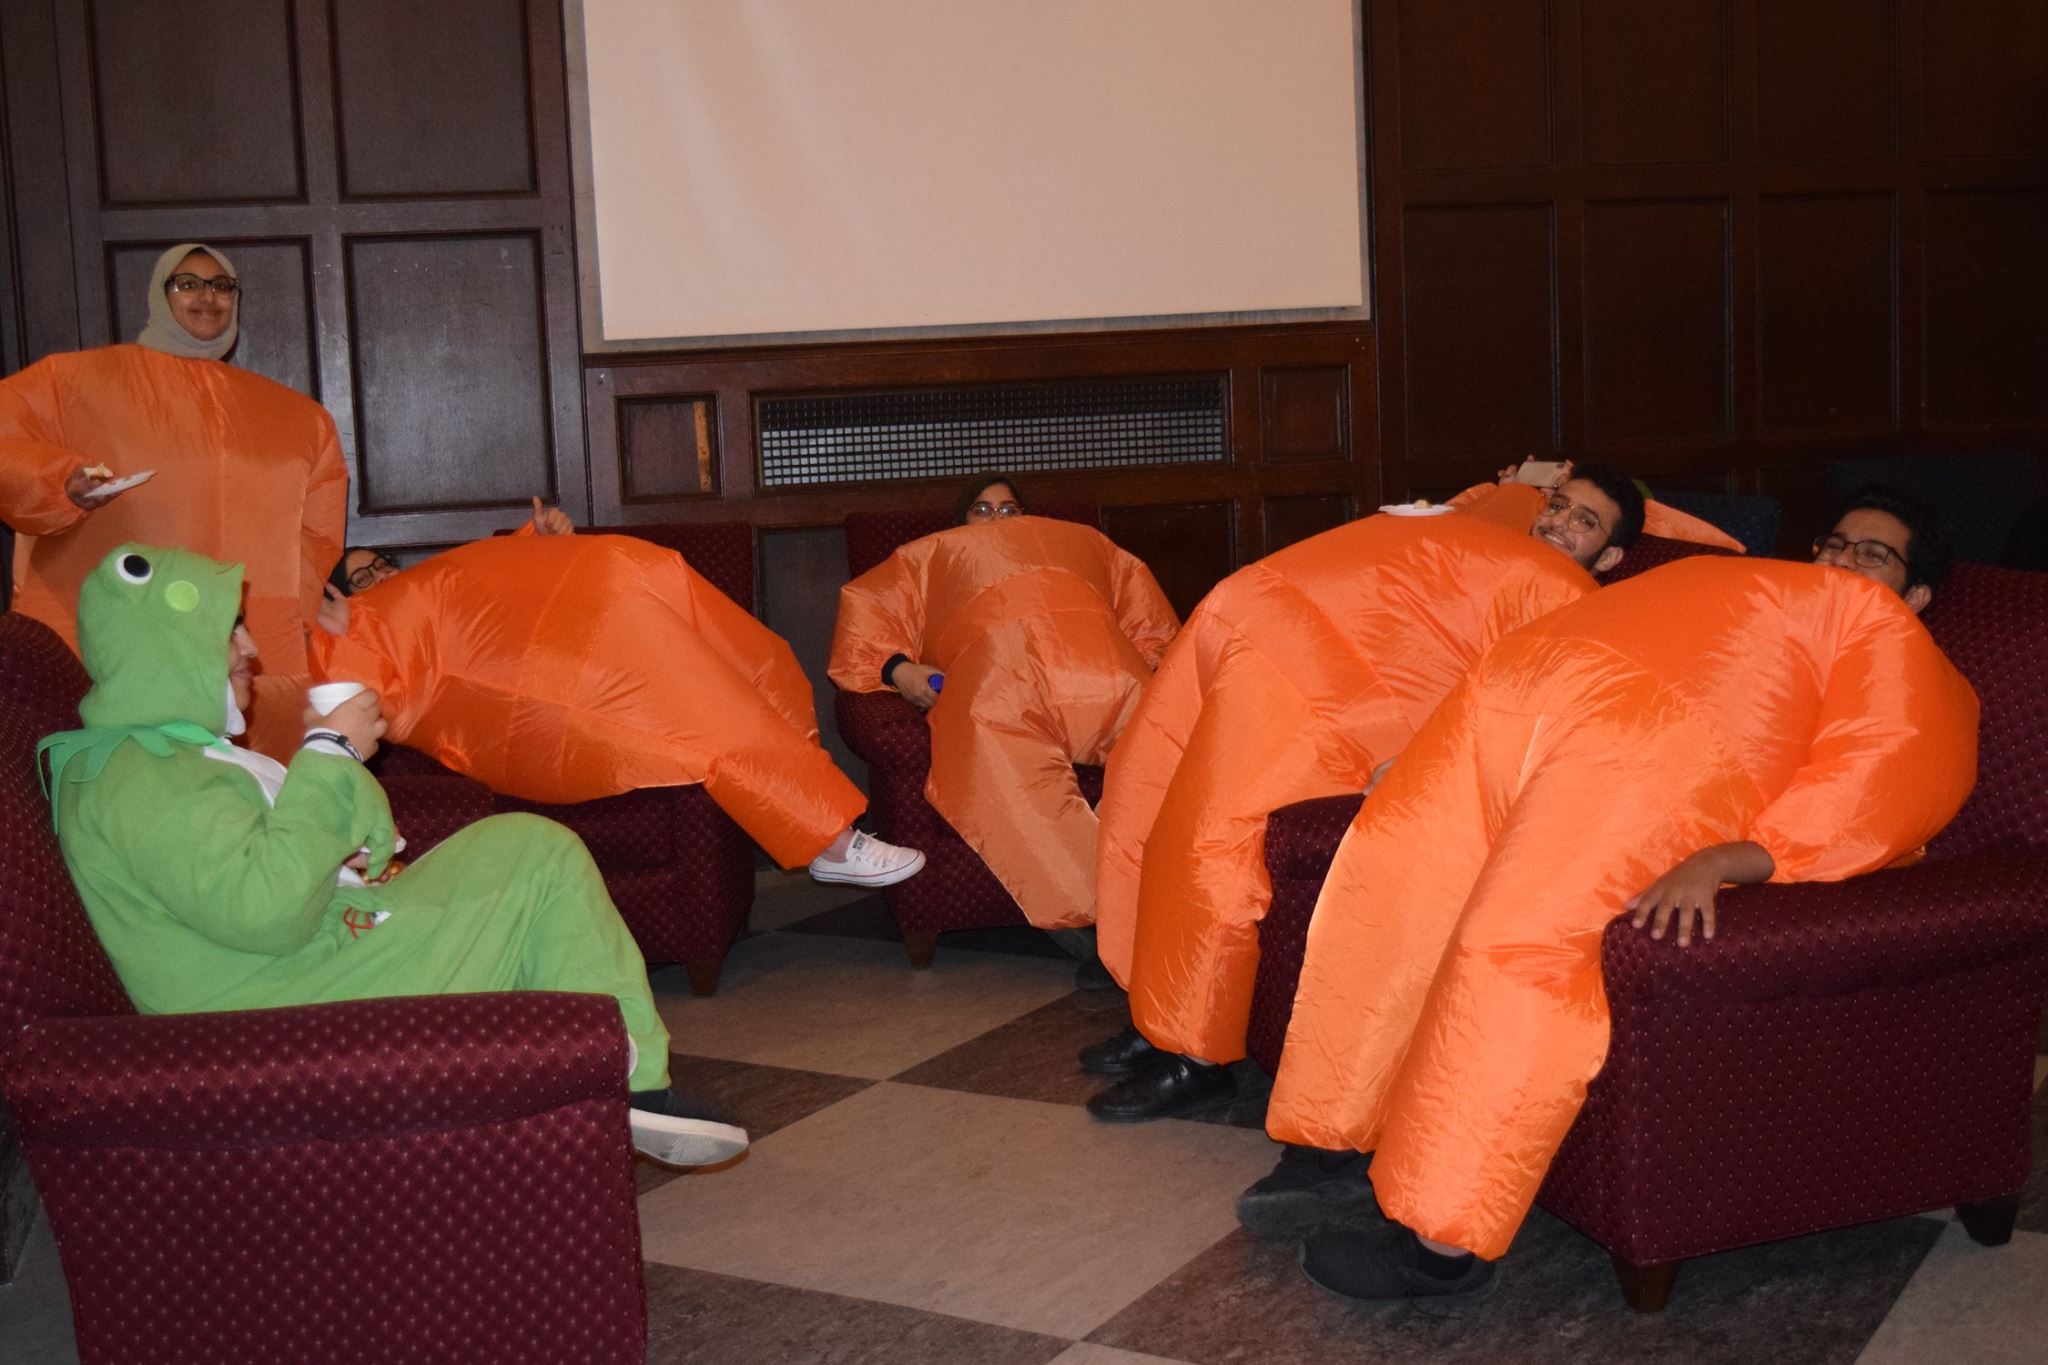 5 students in blow up orange haunt costumes comically posing in a lounge chair around one student in a frog onesie pajama costume